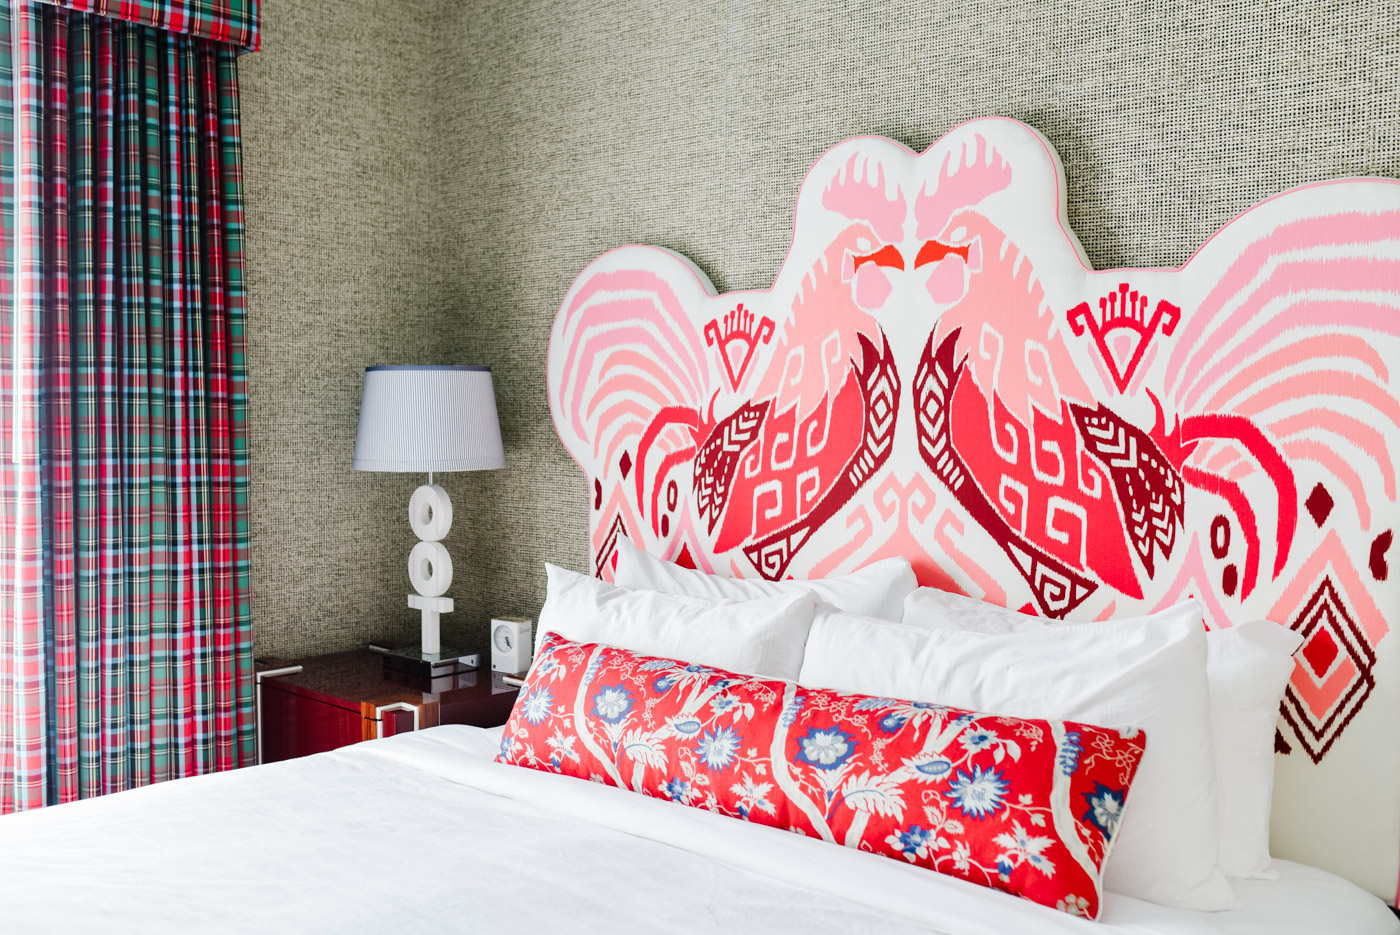 Things to do in Columbia SC by popular Memphis travel blog, Lone Star Looking Glass: image of rooster headboard at the Graduate hotel in Columbia SC.